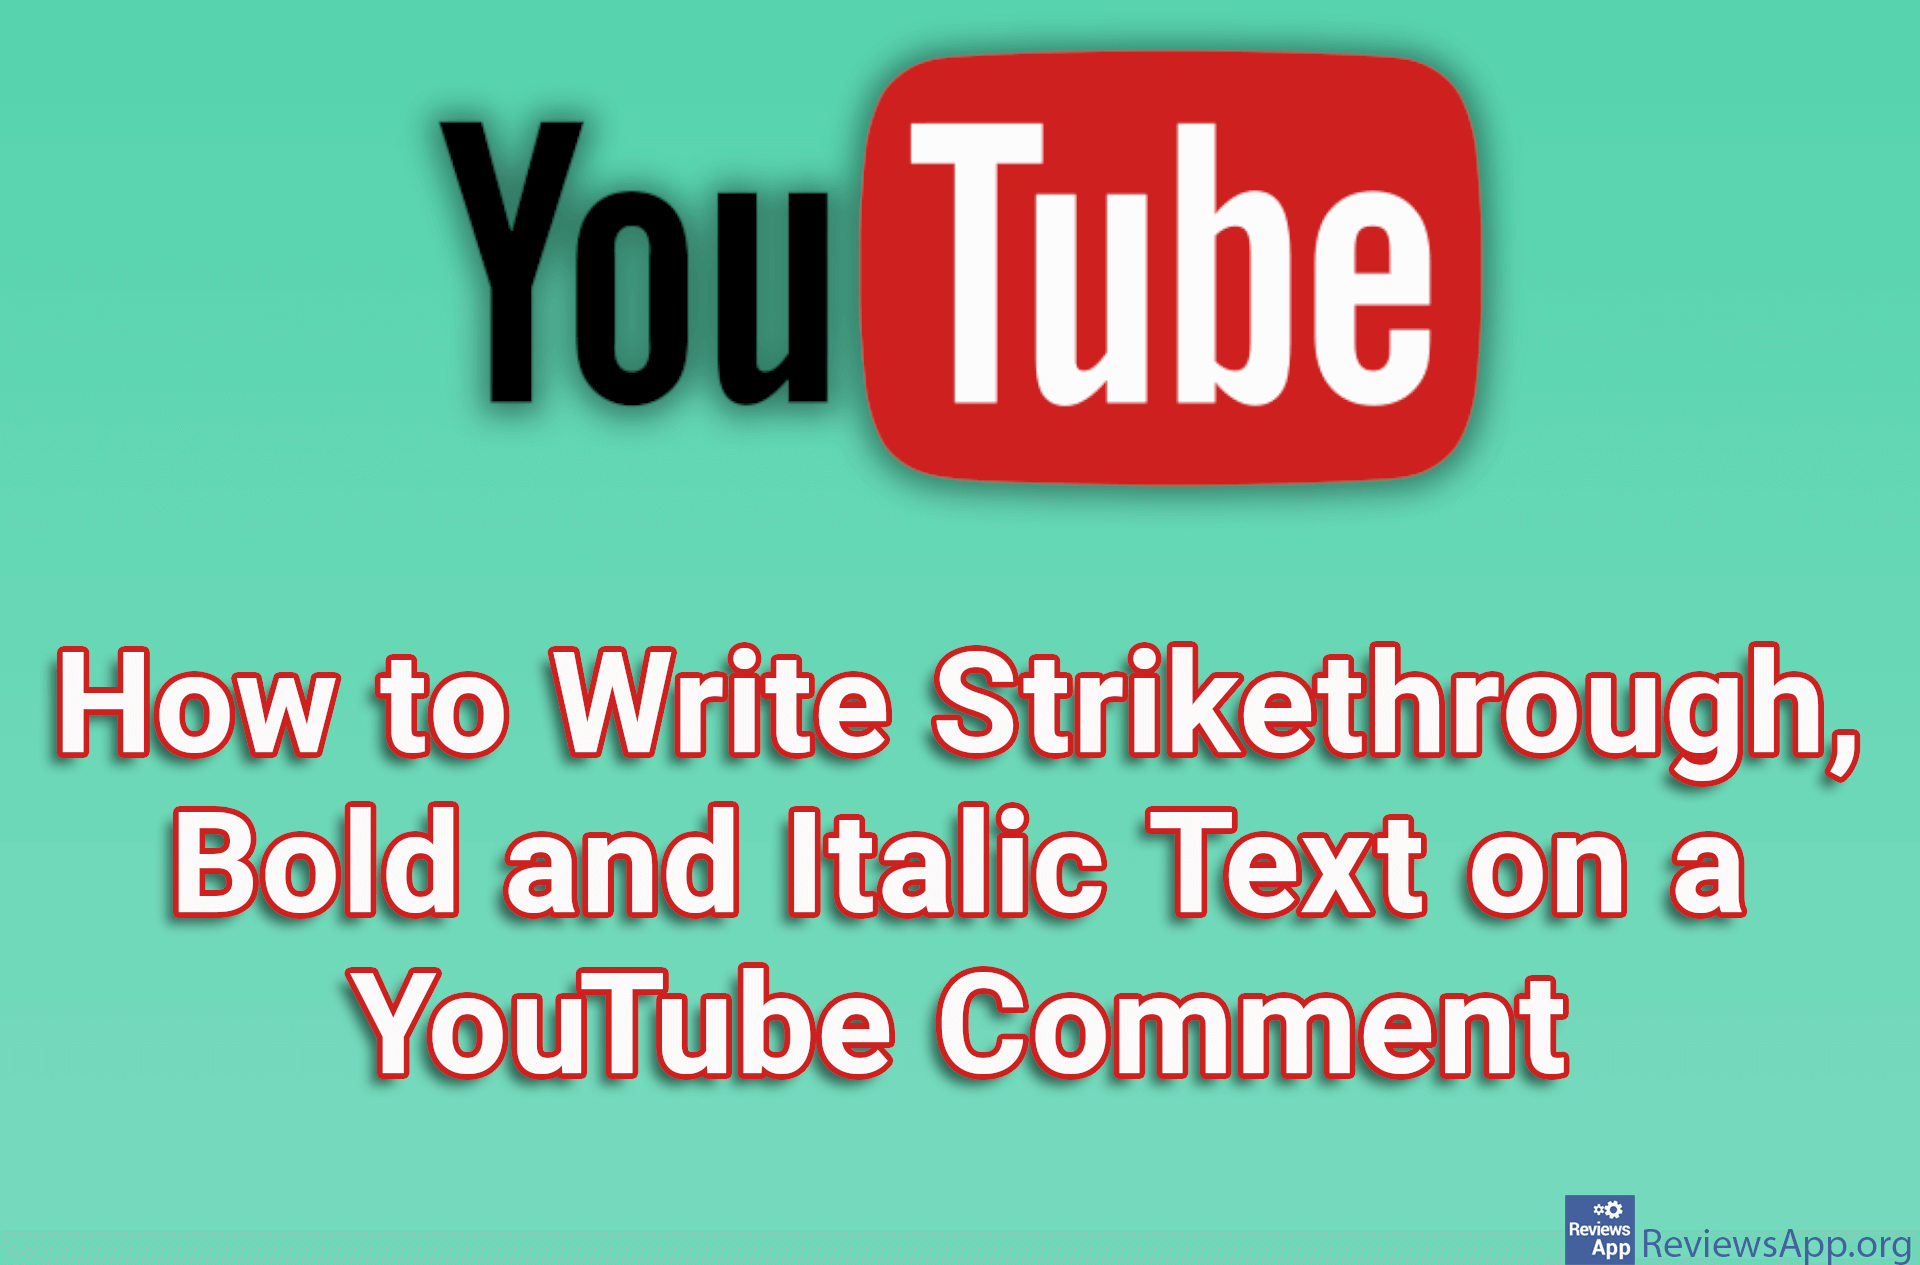 How to Write Strikethrough, Bold and Italic Text on a YouTube Comment